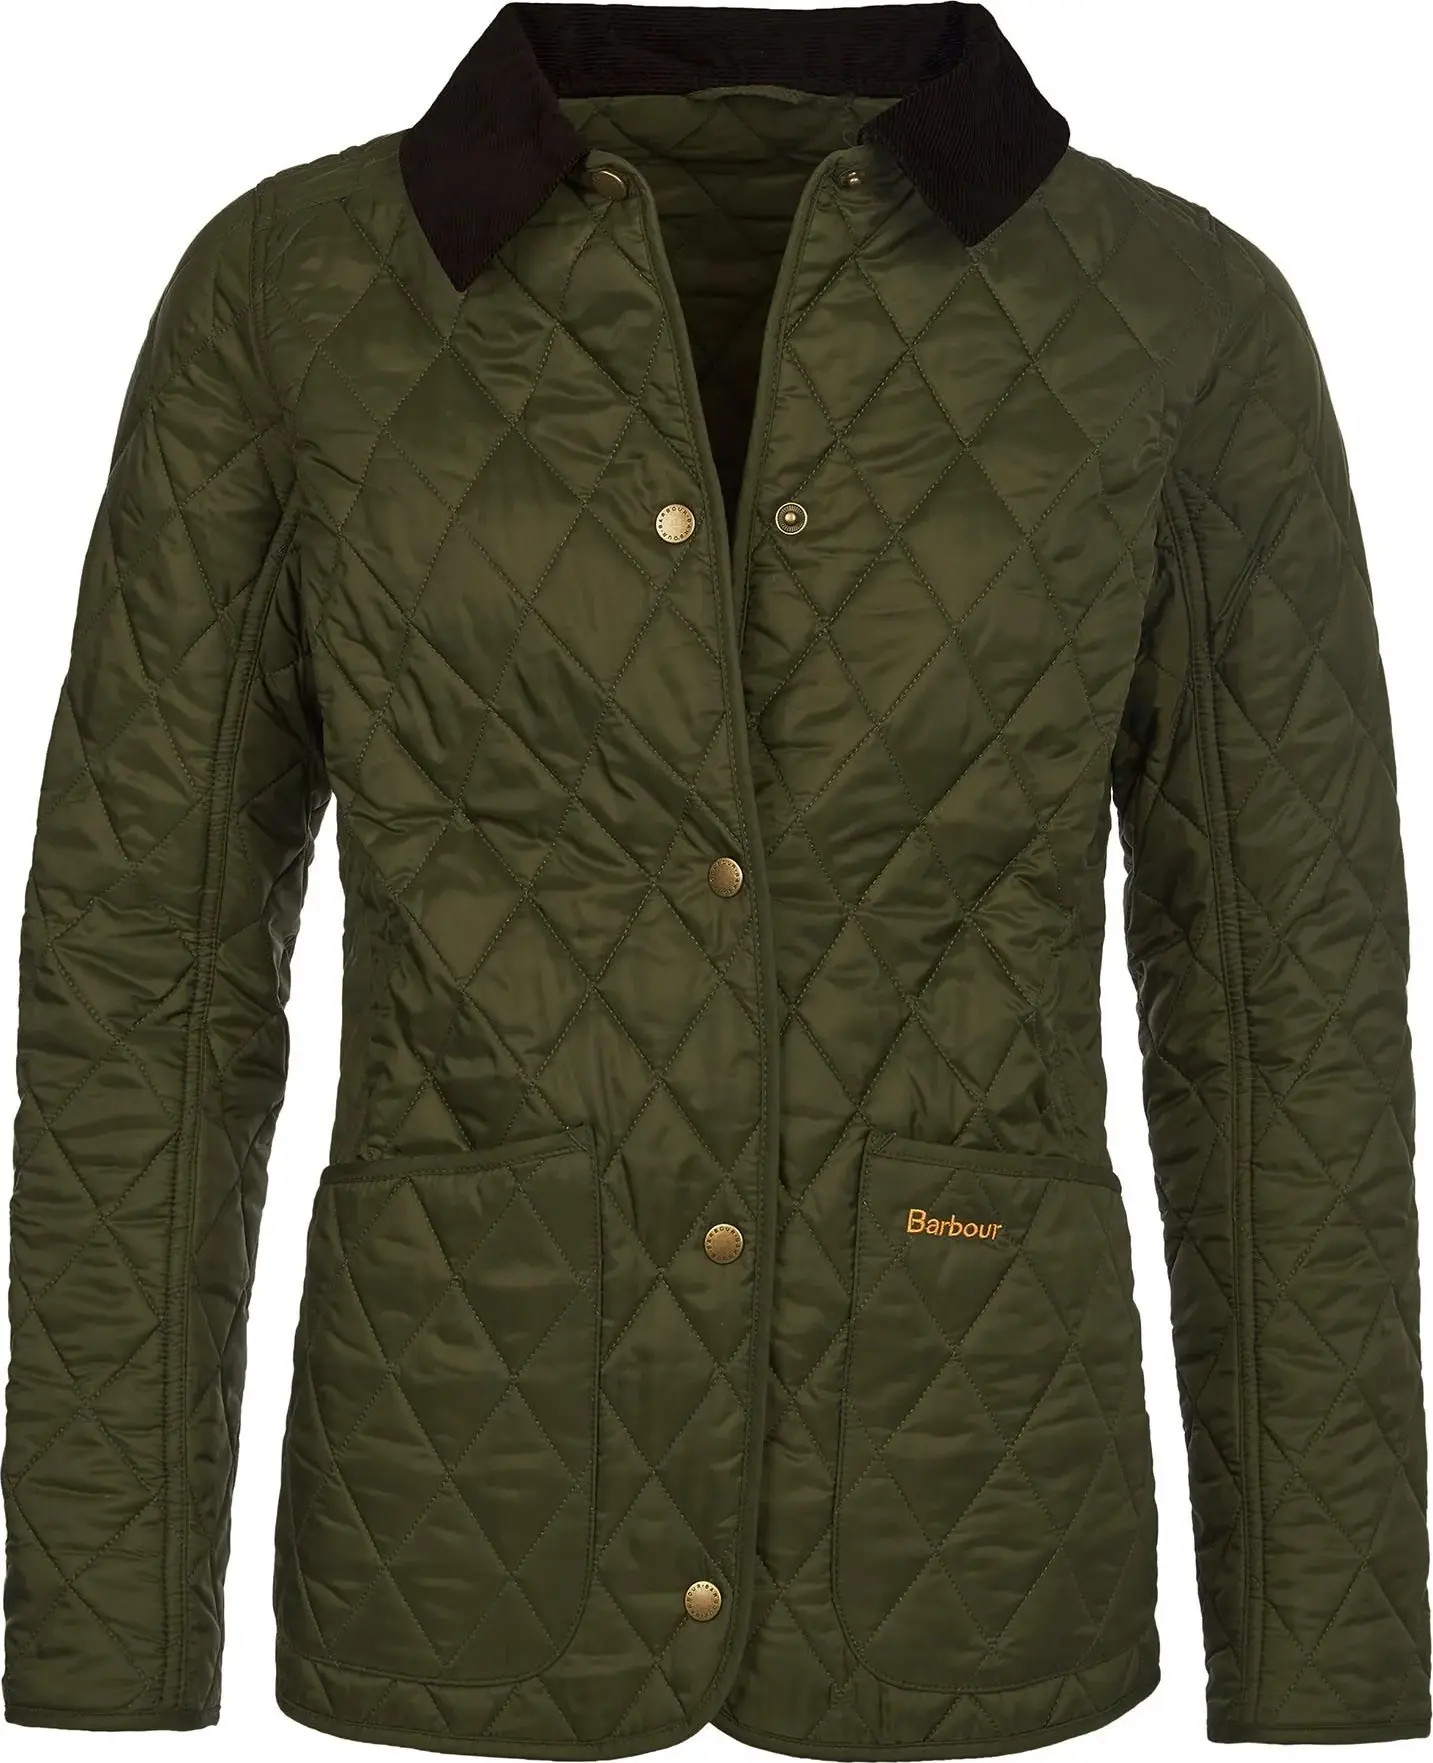 Barbour Women’s Annandale Quilted Jacket Olive